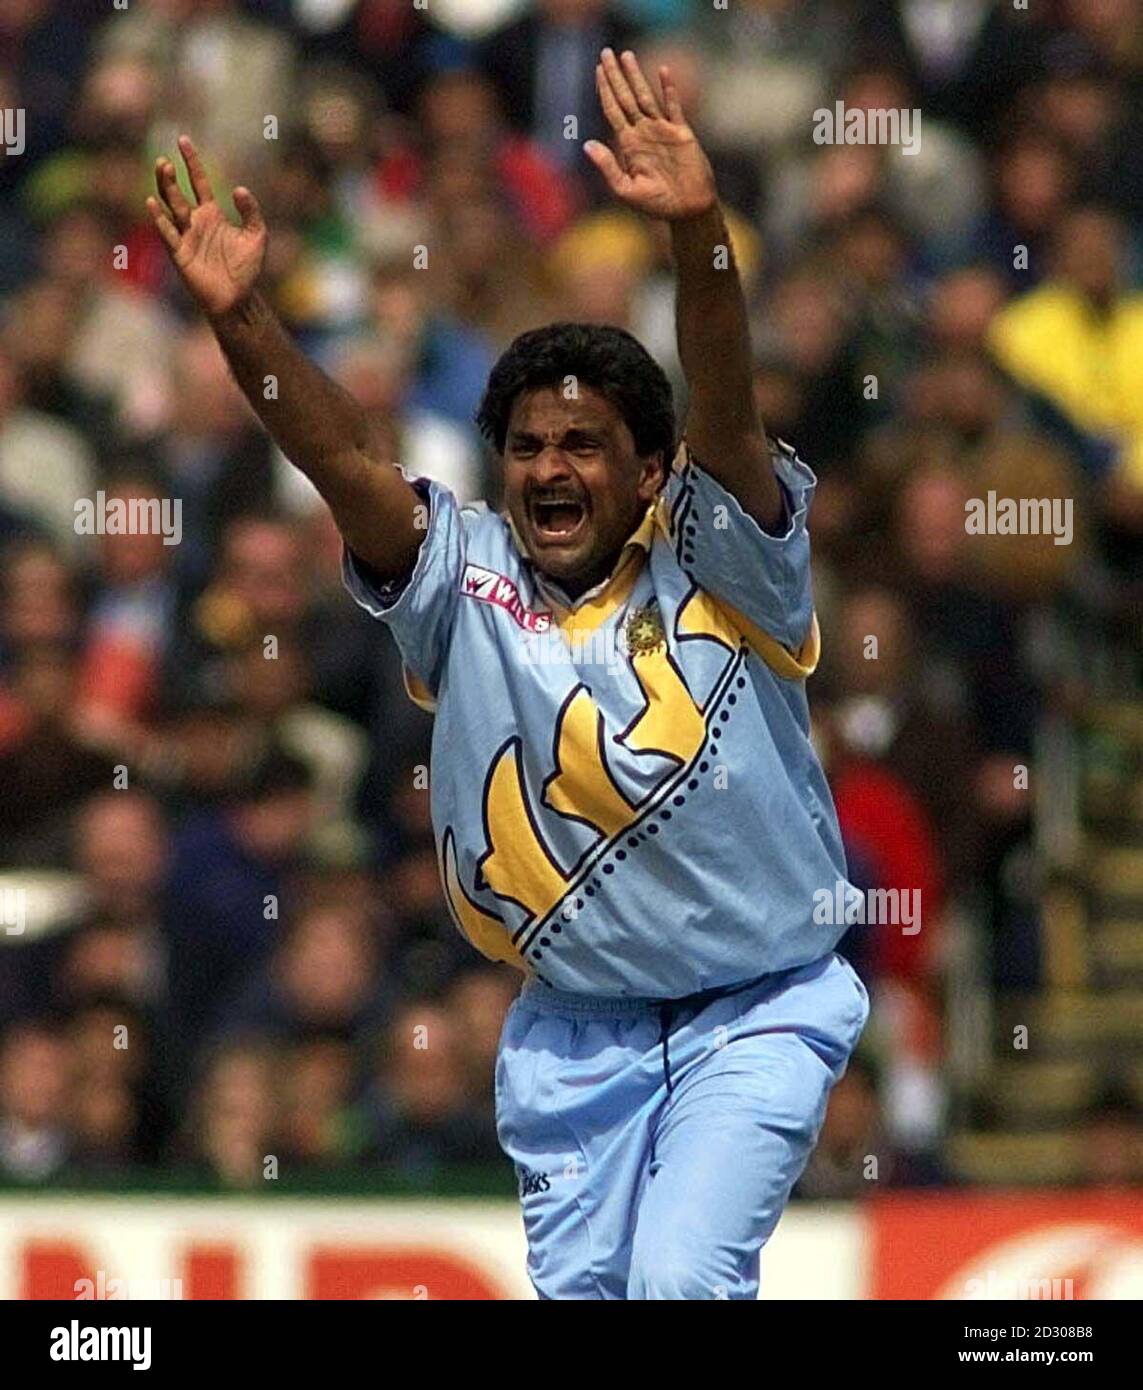 Indian bowler Javagal Srinath unsuccessfully appeals for a Pakistani wicket, during their Super Six Cricket World Cup match at Old Trafford, Manchester. Stock Photo